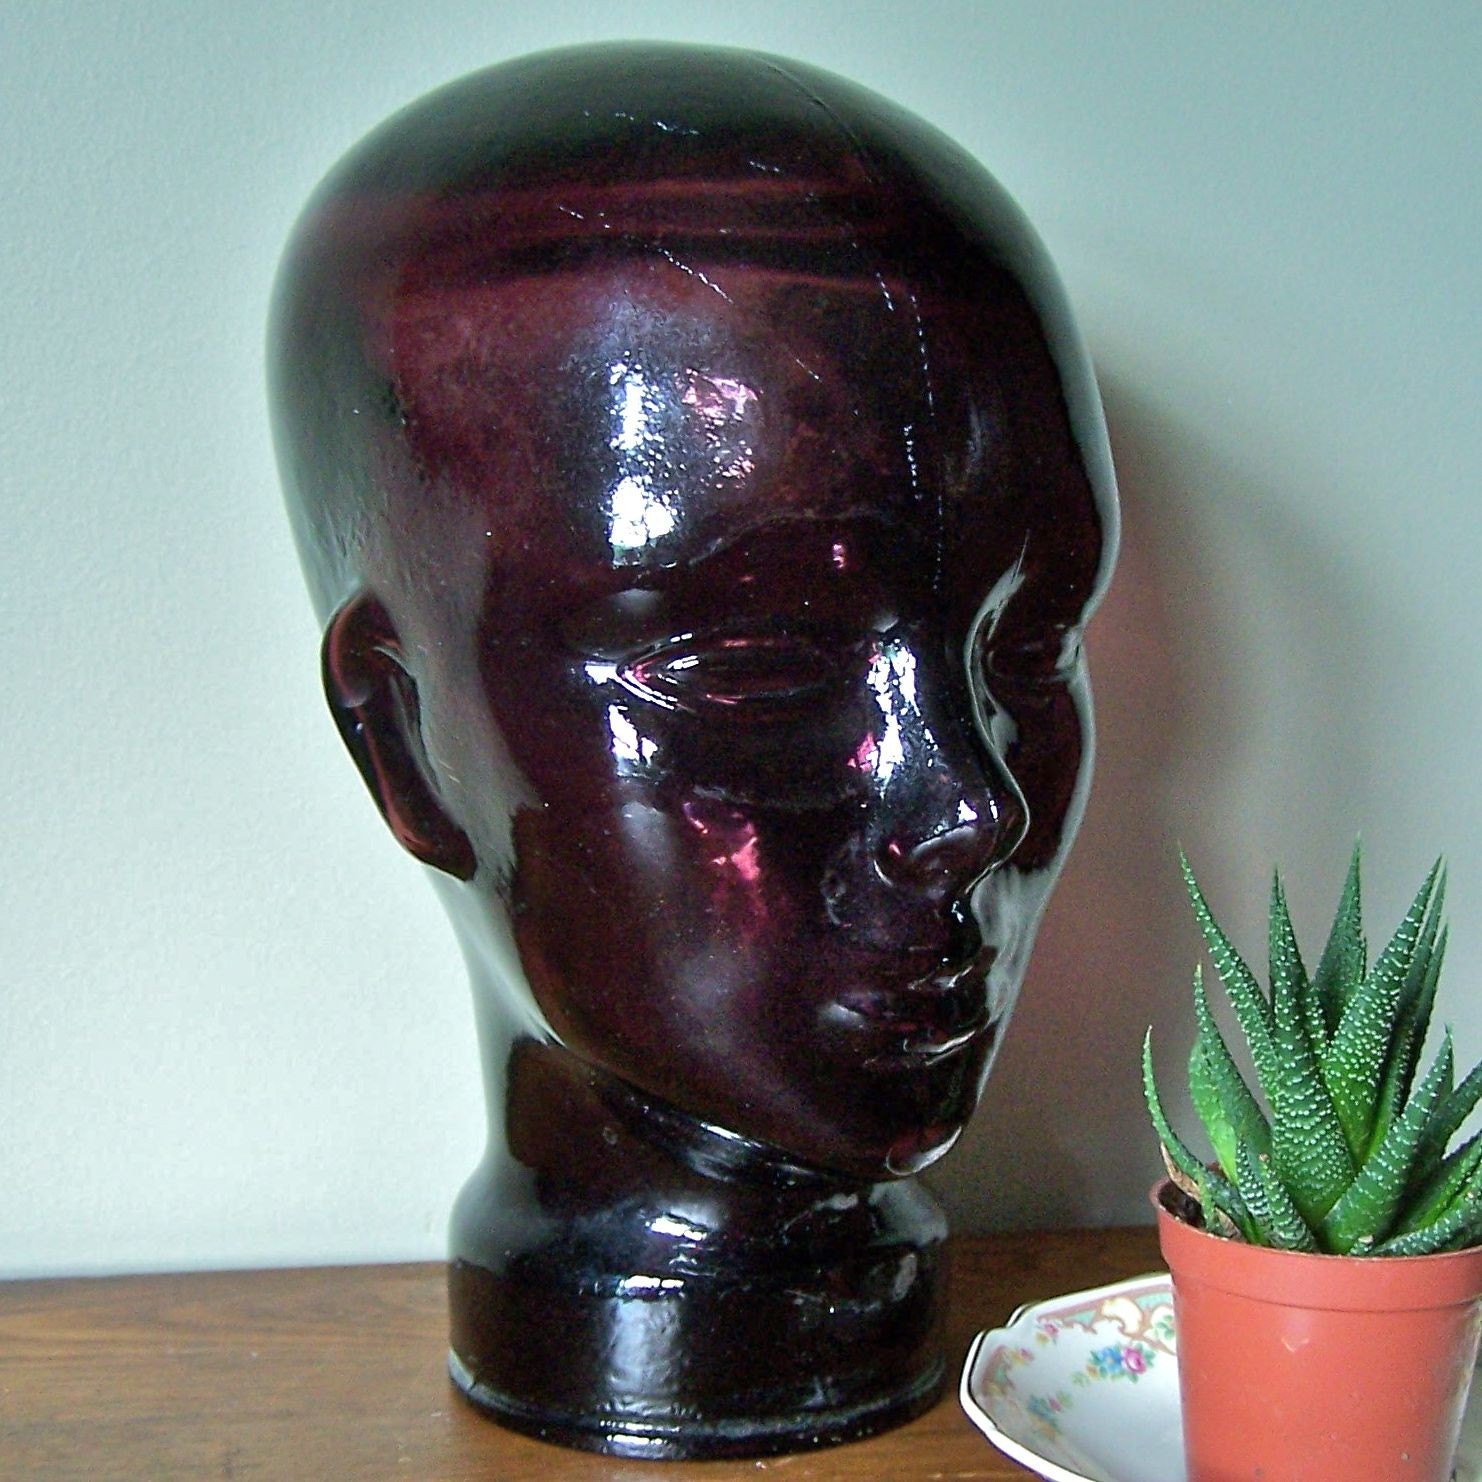 Vintage amethyst glass head from the 1960s purple